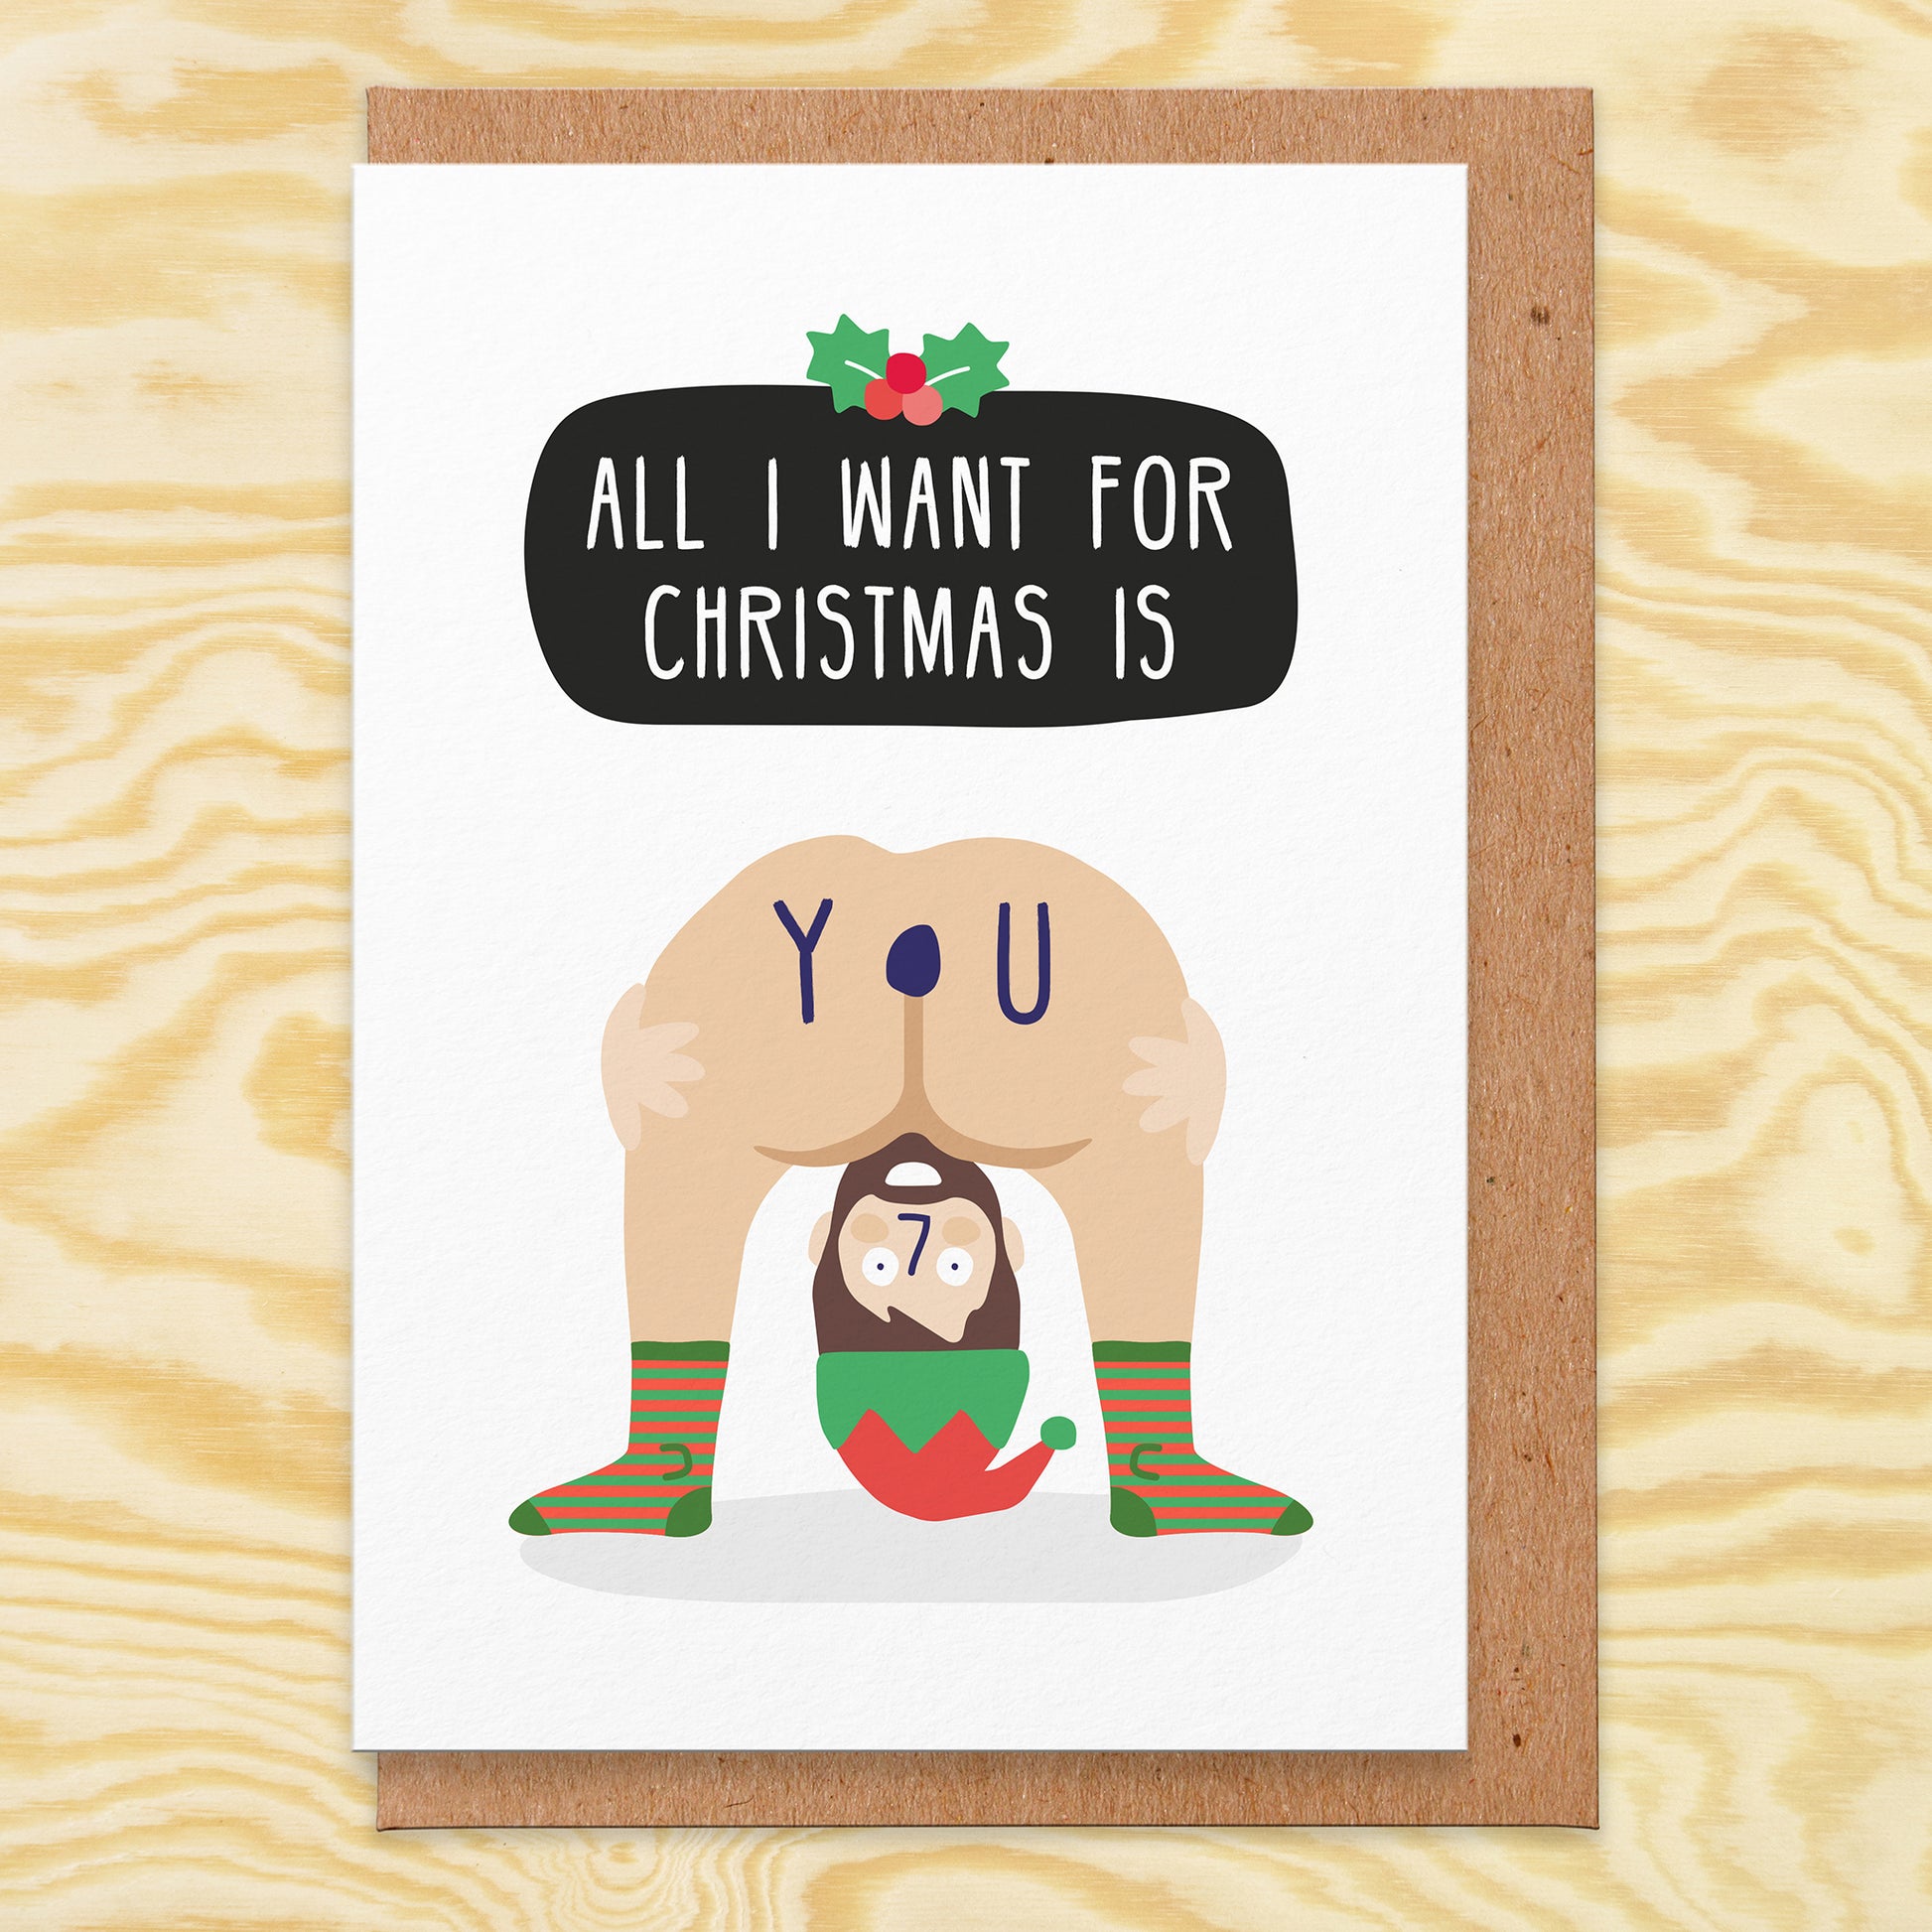 Christmas Greetings card that has an illustration of a man with an elf hat bending over  and showing his bum and it says All I Want For Christmas is You and the You is in the bum